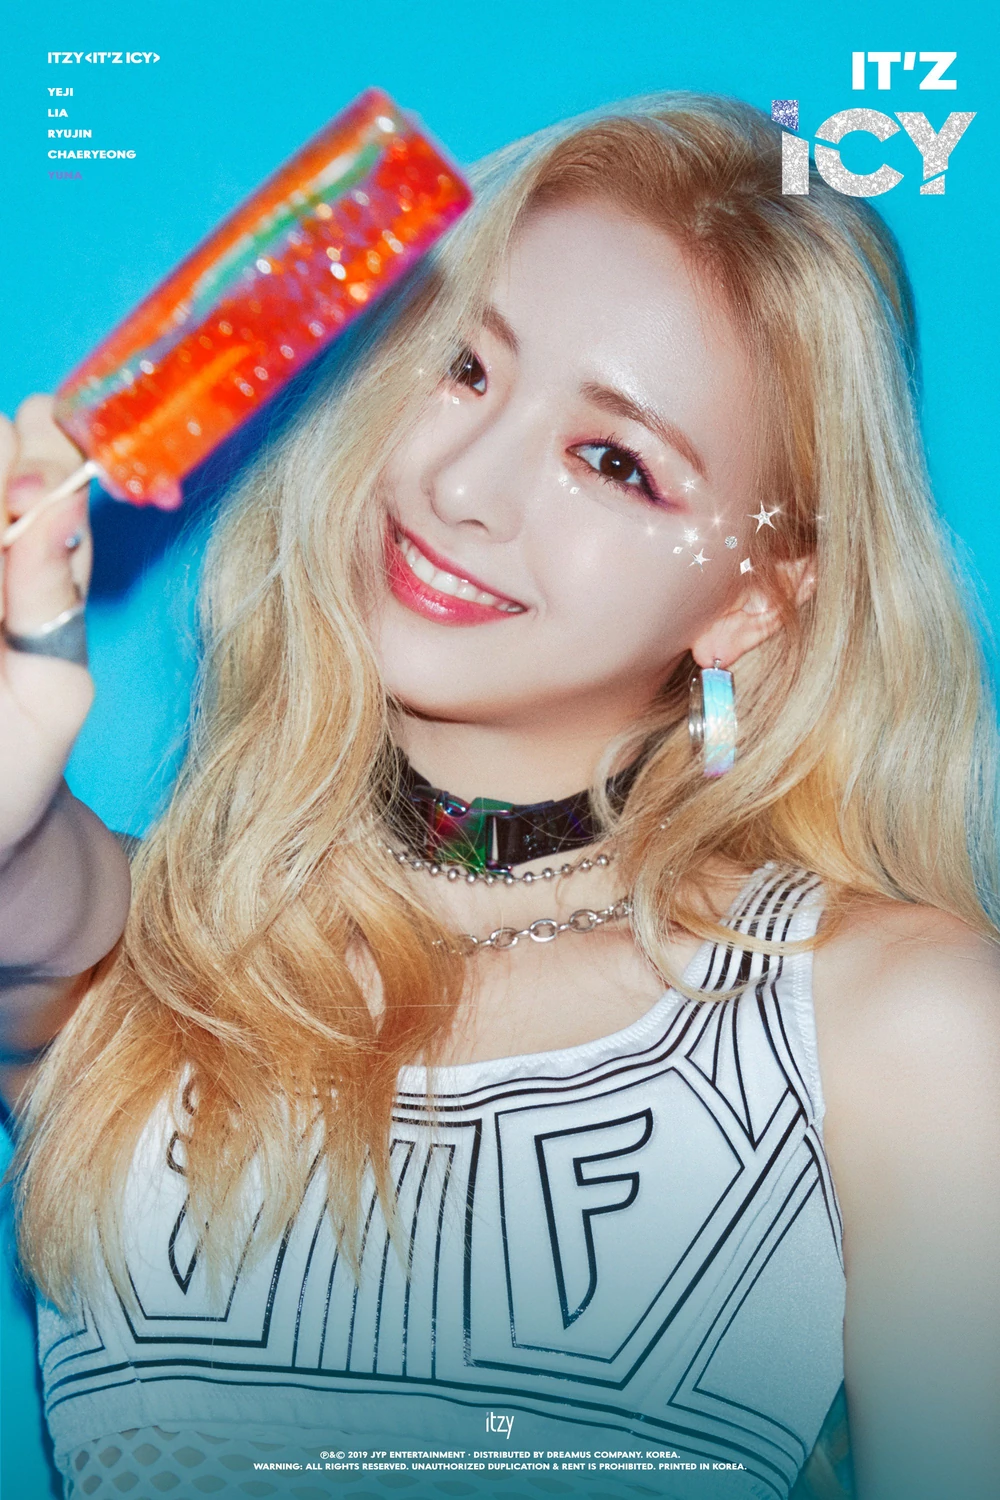 Itzy It'z Icy Yuna Concept Teaser Picture Image Photo Kpop K-Concept 3